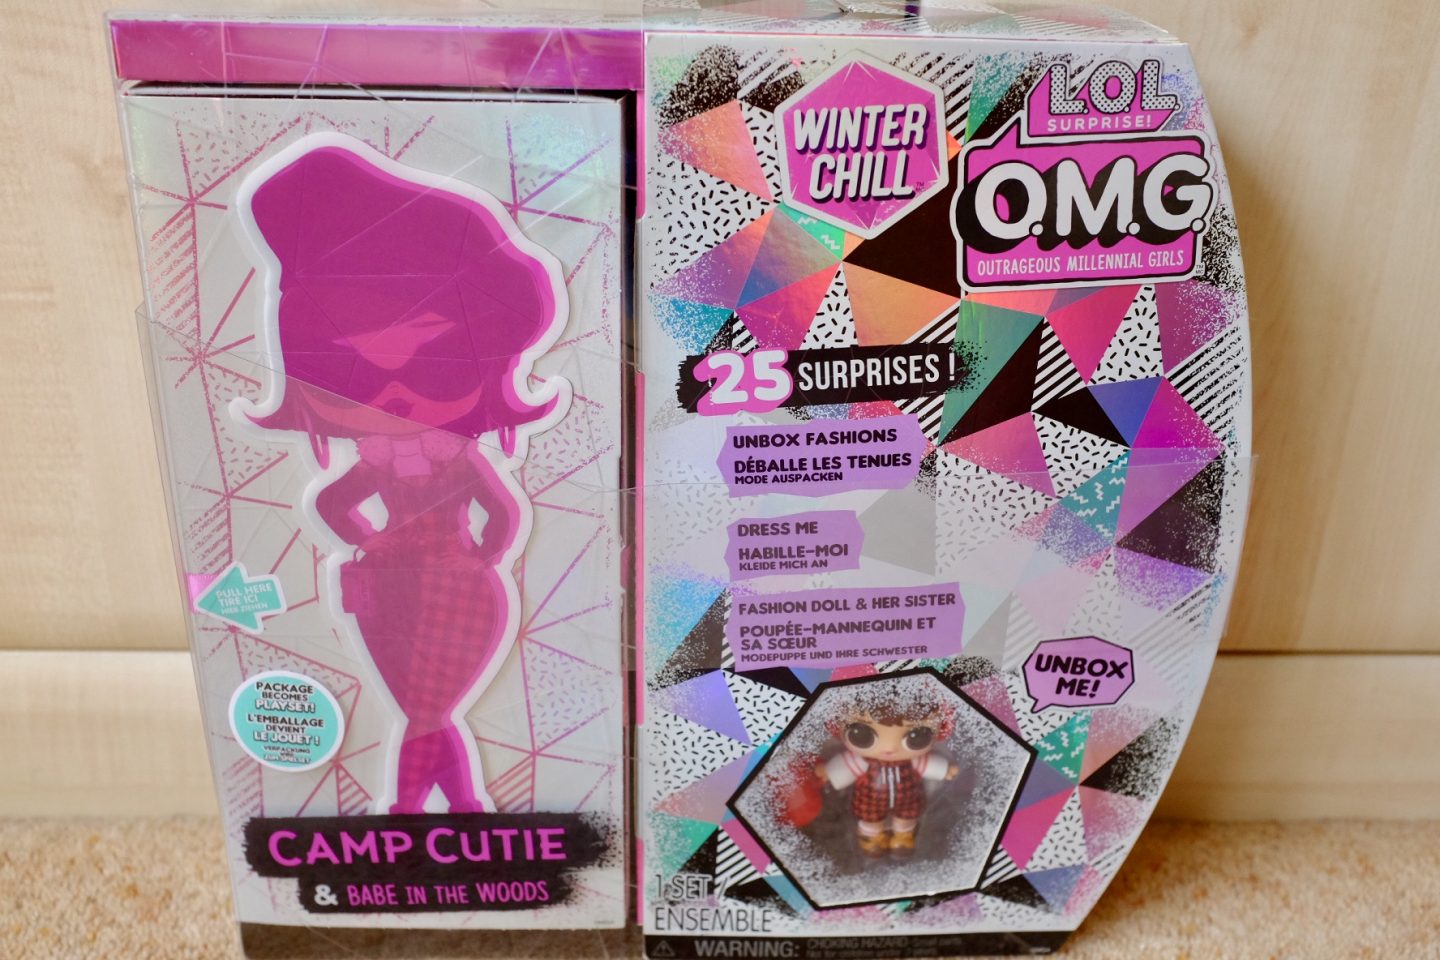 LOL surprise! OMG winter chill doll Camp Cutie & Babe in the Woods set